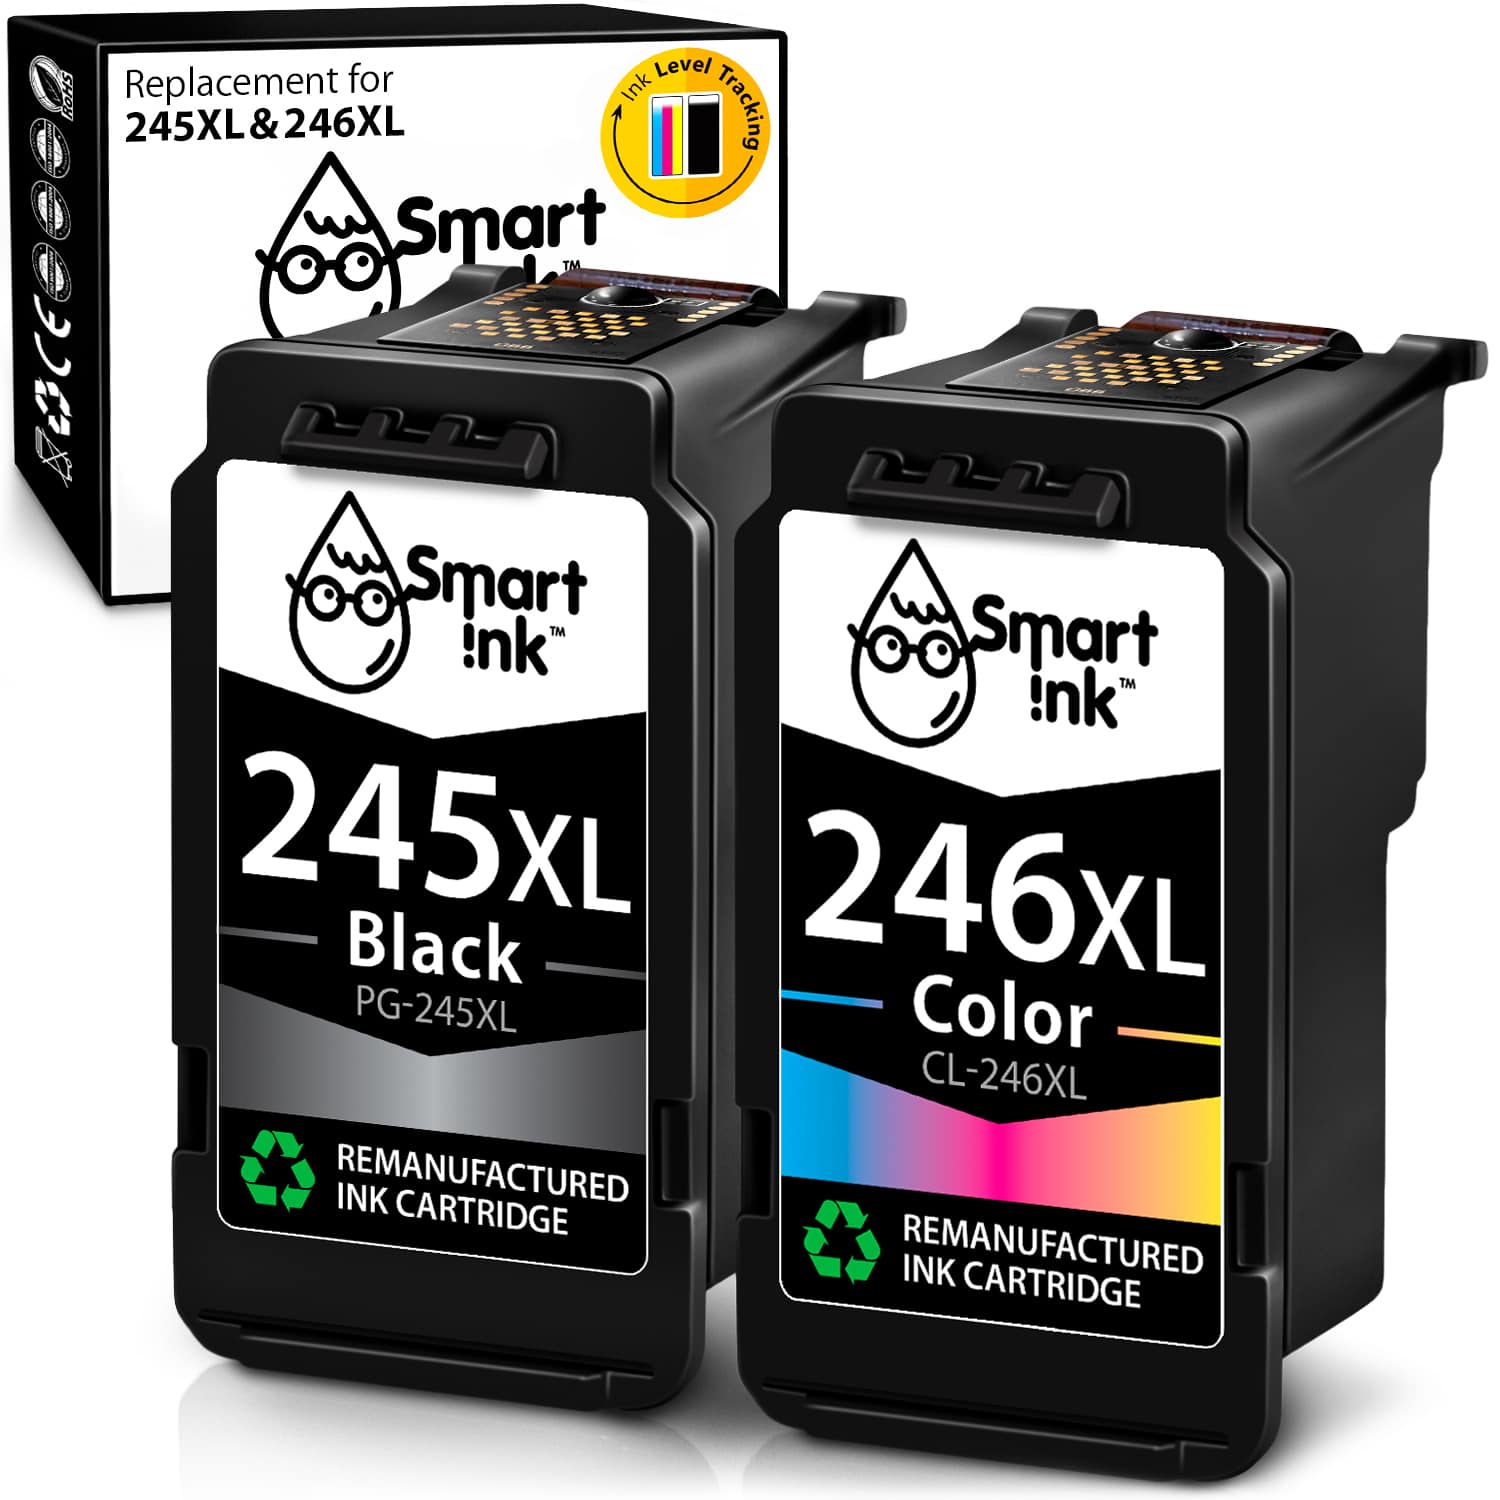 Canon 245, 246 XL (Combo) Replacement Ink Cartridges Buy at the Best Price | Smart Ink